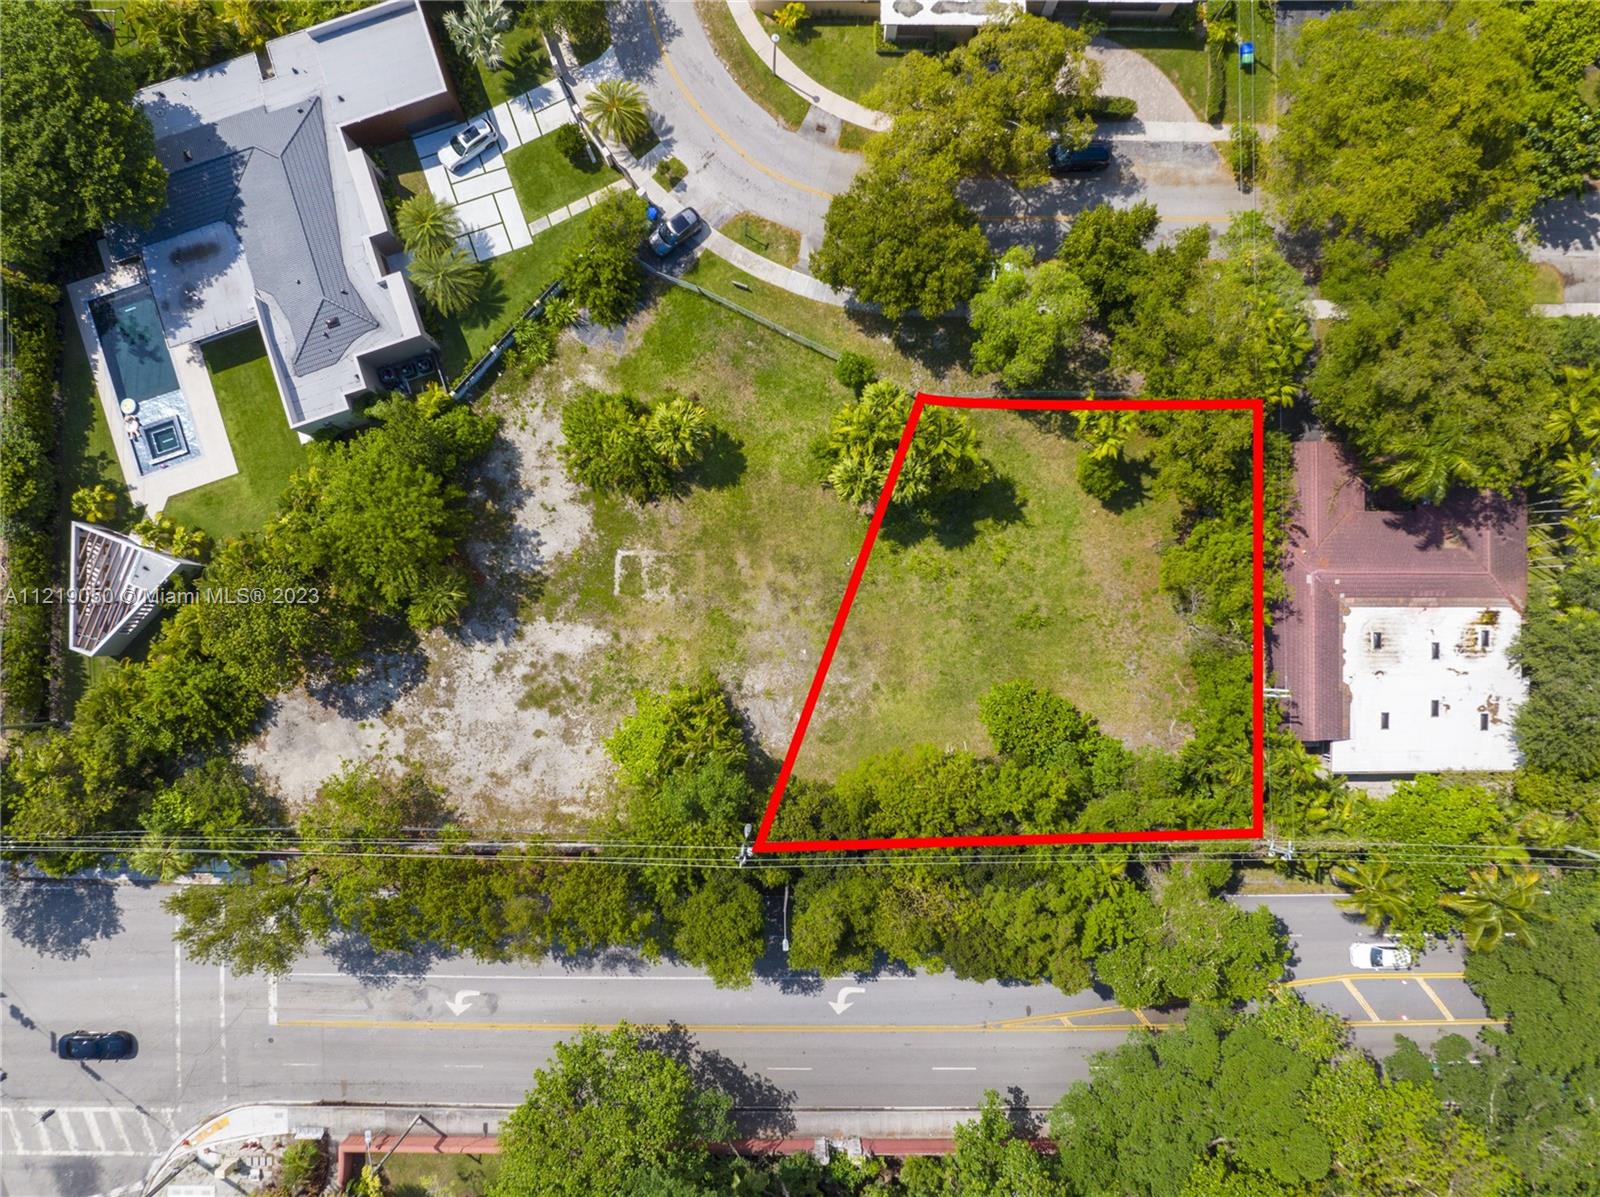 Unique opportunity to purchase this individual large 12,675 SF lot for $2.2M and build your dream home in prestigious and 24 hour policed patrolled Bay Heights! This is a great community with no thru traffic, in a NO FLOOD ZONE!  It is walking distance to Viscaya, Kennedy Park, the Bay and Ransom Everglades Middle School. 
Or purchase two lots side by side for a combined square footage of 30,574, asking $5.3M!  
We can put you in touch with lenders and construction companies to customise your home.